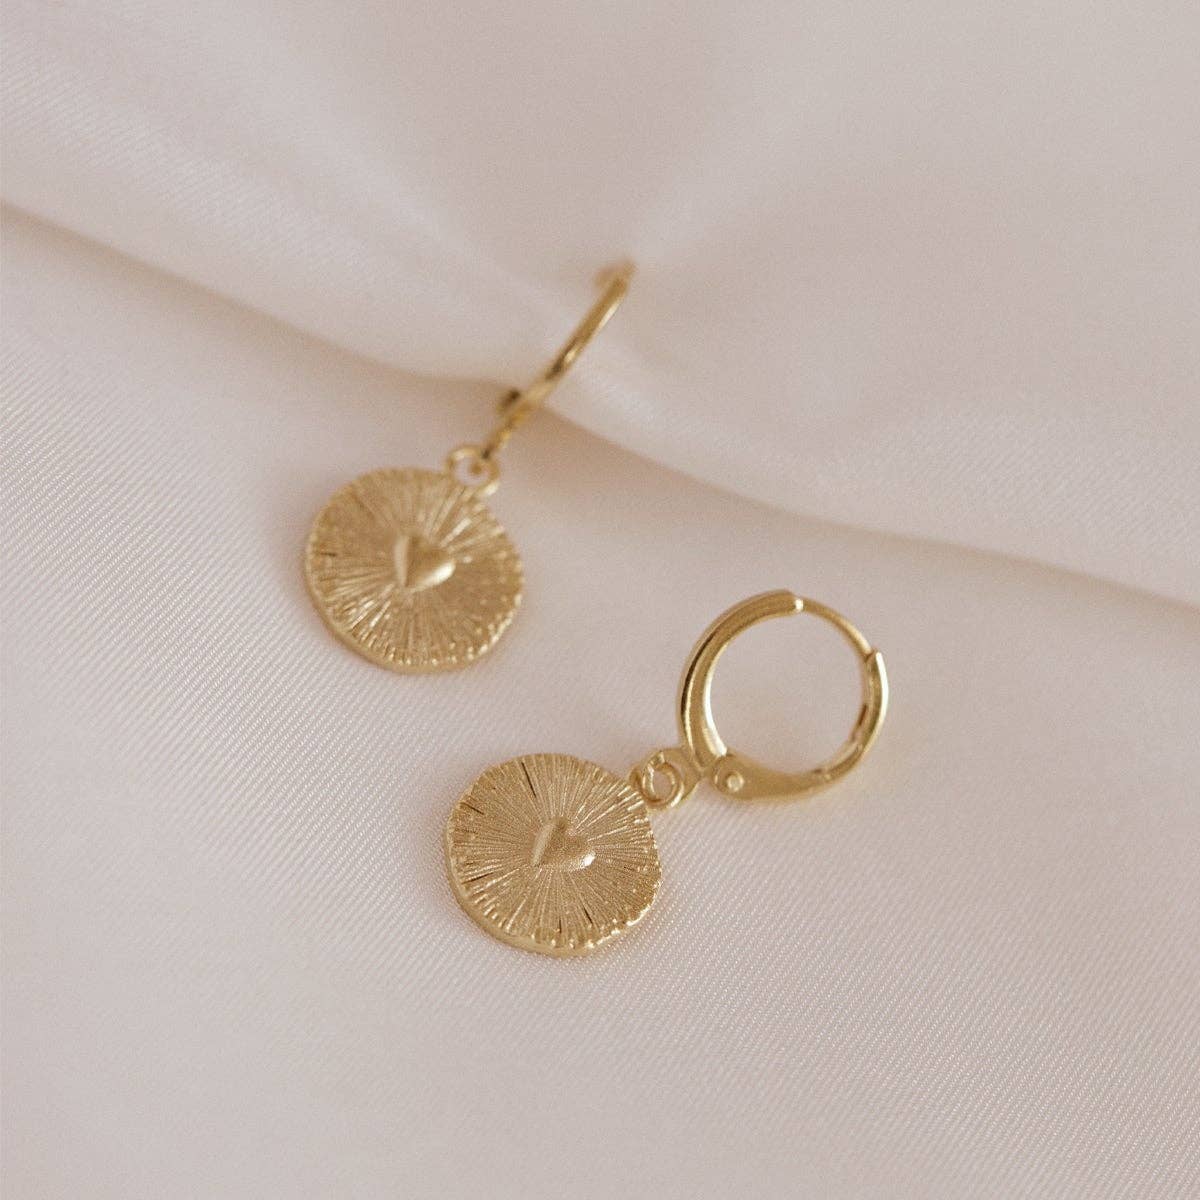 Kara Earrings | Jewelry Gold Gift Waterproof - Out of the Blue